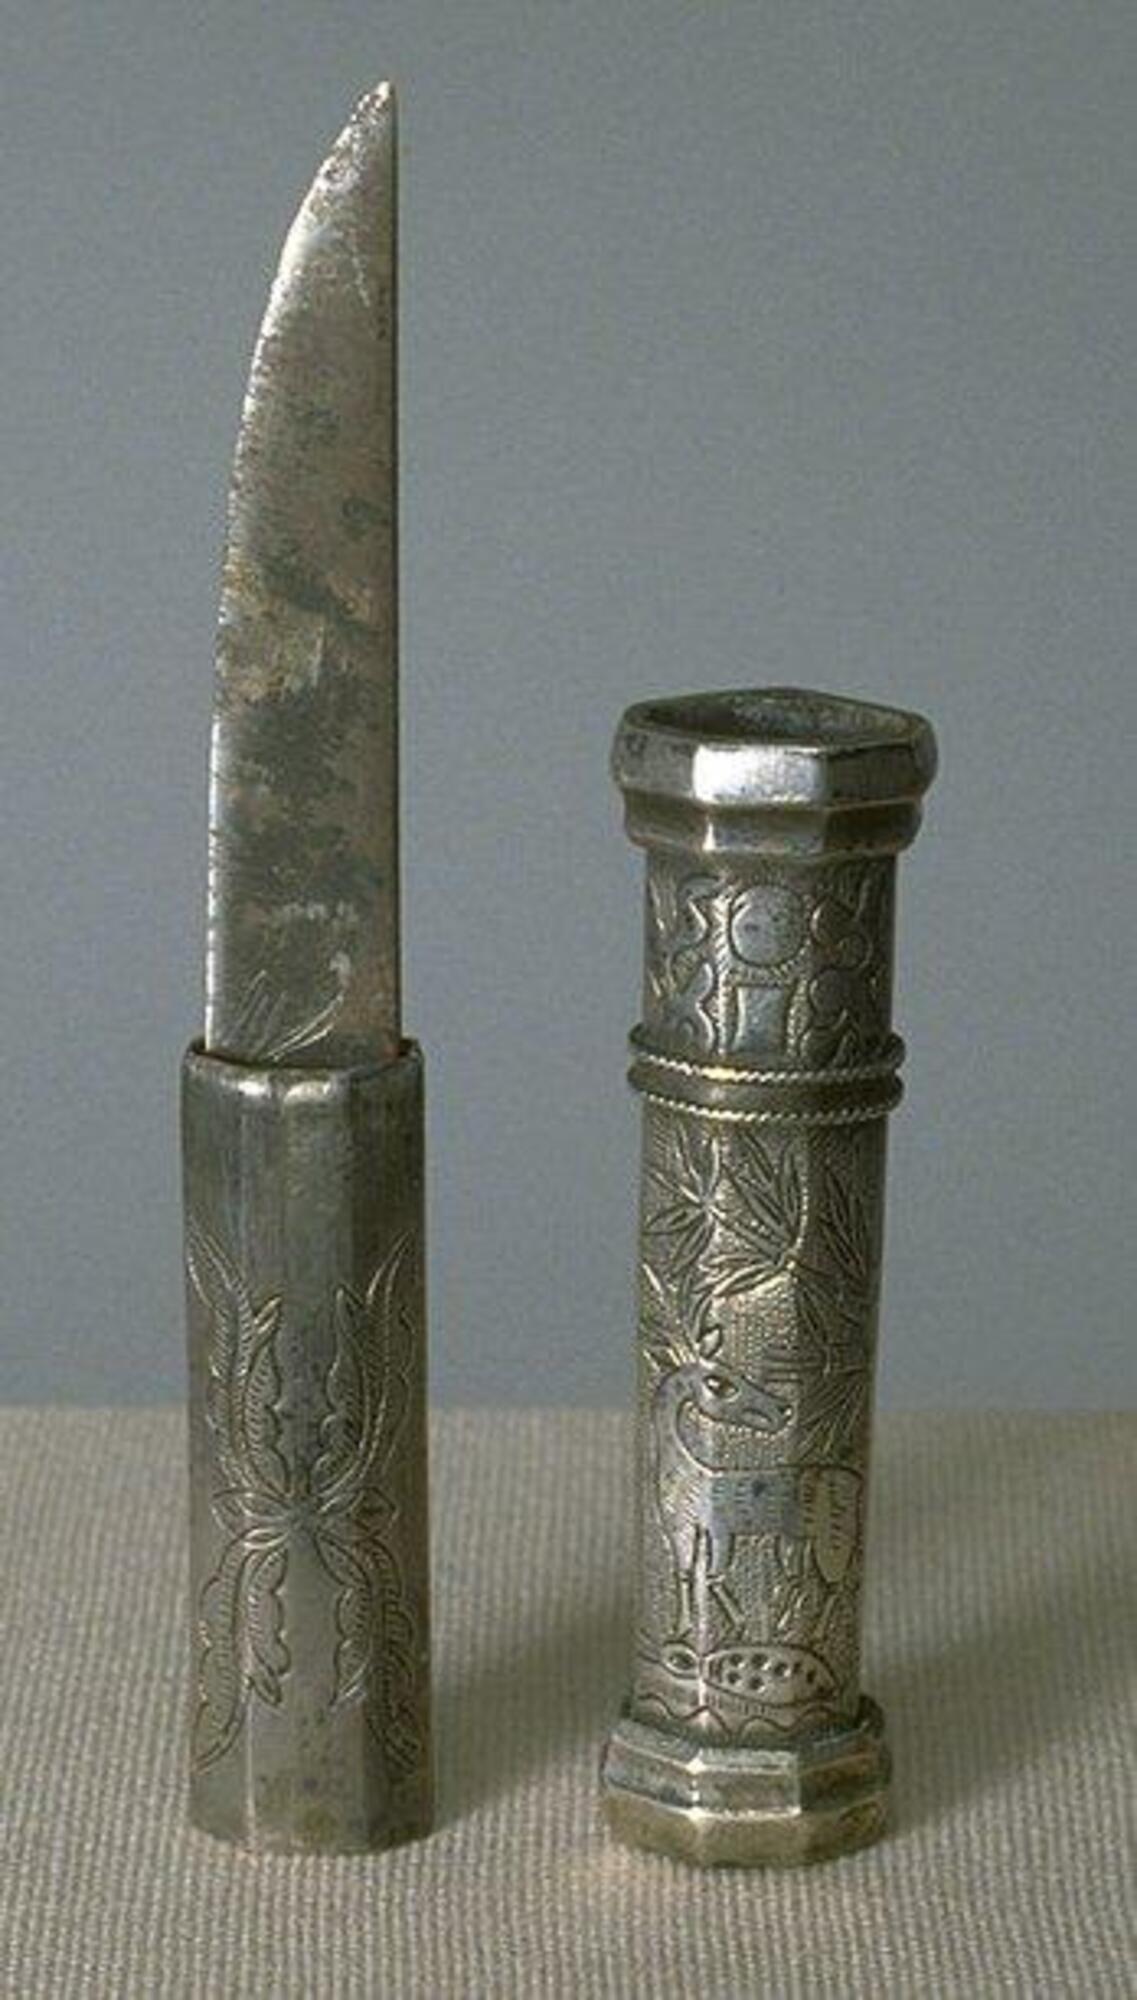 It is a knife made of silver. The sword blade was made of steel. Floral design was printed on the knob and Deer and bamboo was printed on the cover.<br />
<br />
This small knife is worn by a man. The handle and sheath are decorated with ten symbols of longevity against ring-punched background. The other side features engravings of plantains and lotus buds. Plantain symbolizes resuscitation from death and is one of the Eight Treasures of Taoism. The lotus flower symbolizes purity and the law of cause and effect as it emerges from mud (dirt) and bears seeds.
<p>[Korean Collection, University of Michigan Museum of Art (2017) p. 285]</p>
<br />
&nbsp;